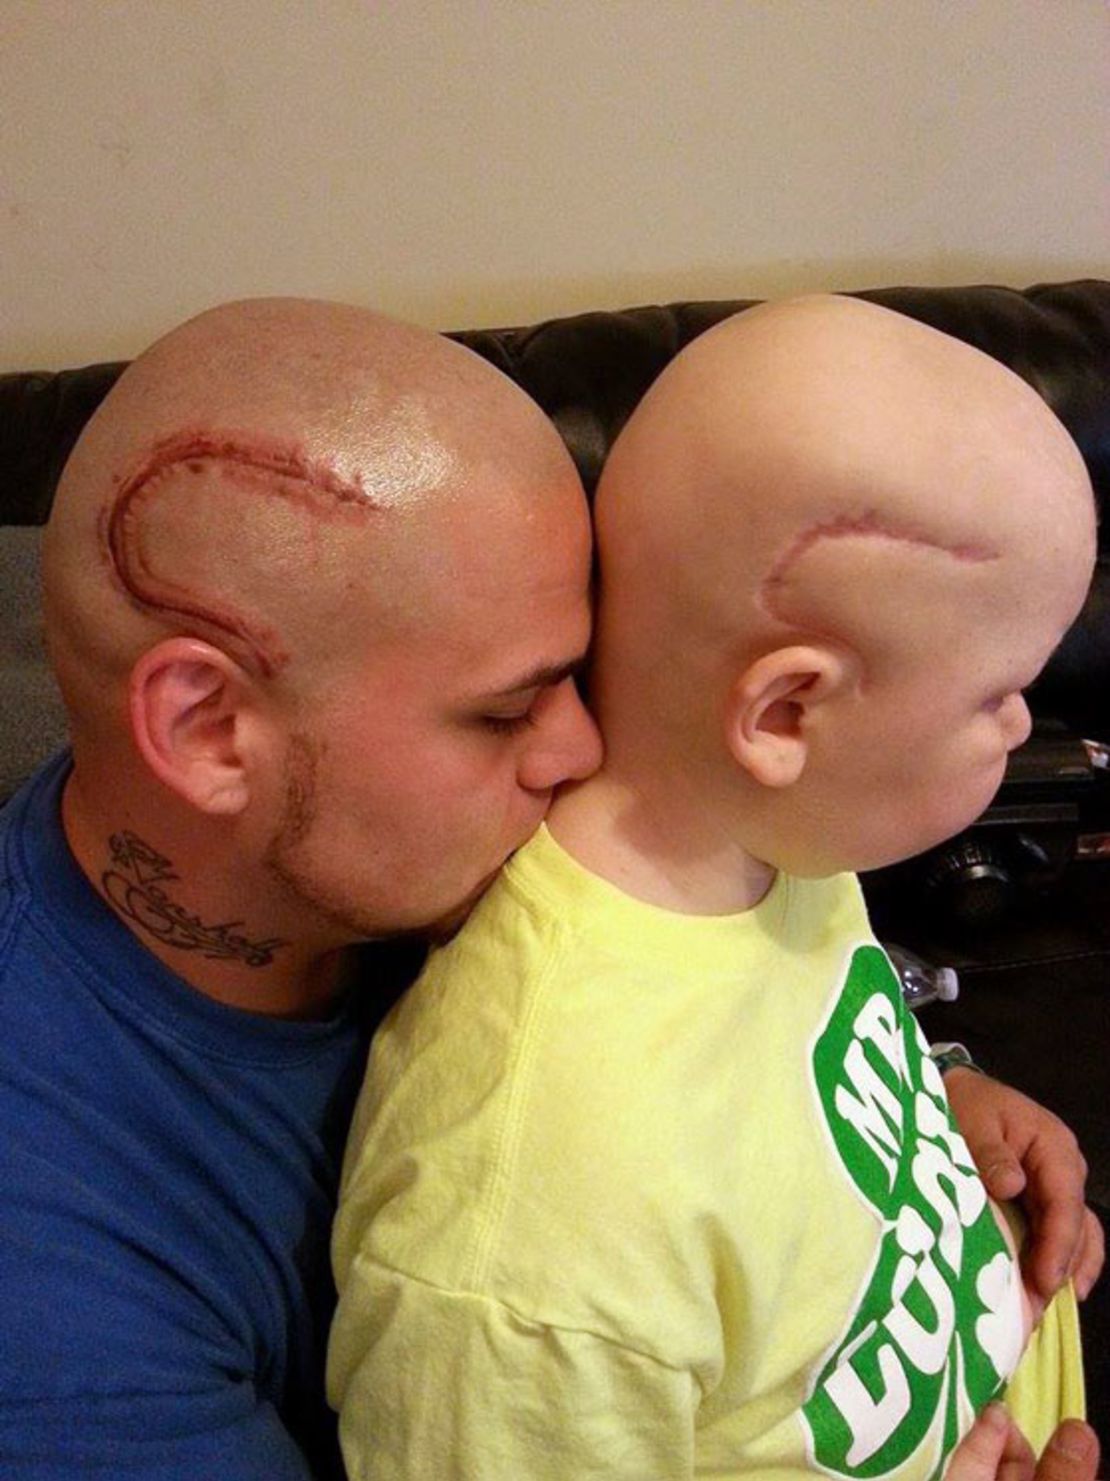 Josh Marshall's tattoo matches the scar on his son's head.